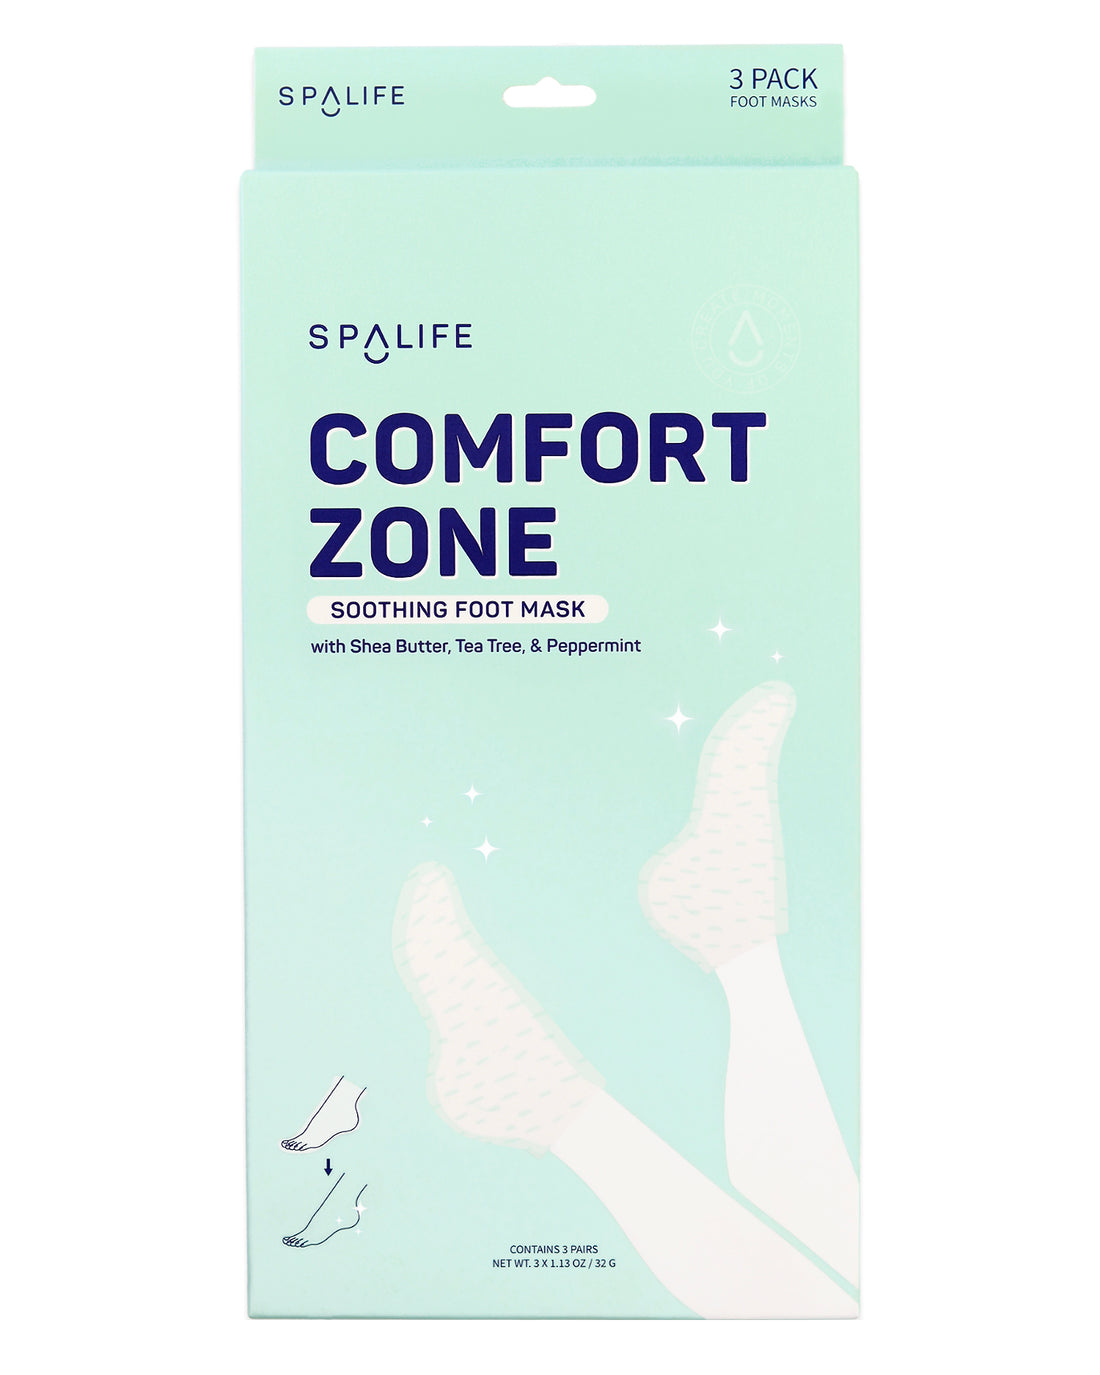 Comfort_zone_soothing_foot_mas-36